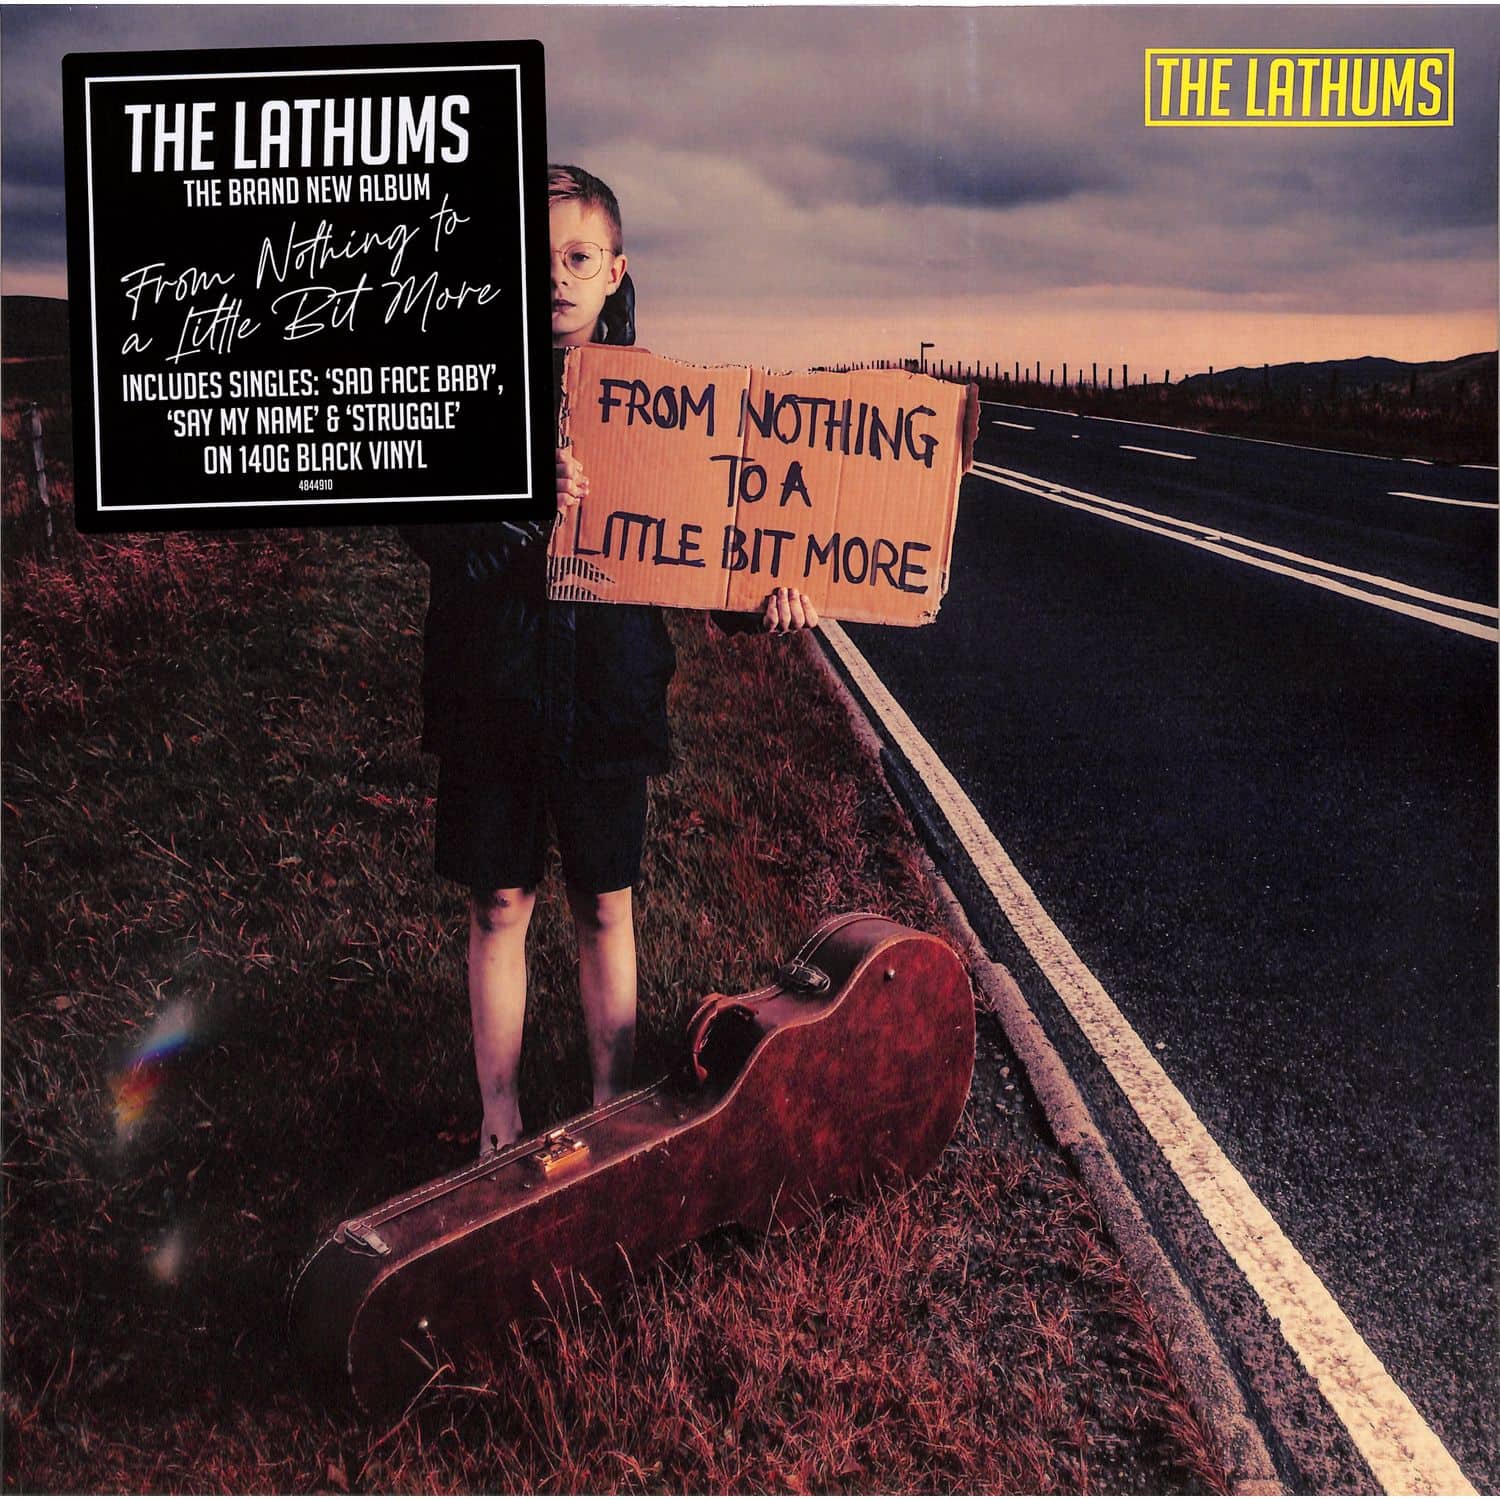 The Lathums - FROM NOTHING TO A LITTLE BIT MORE 